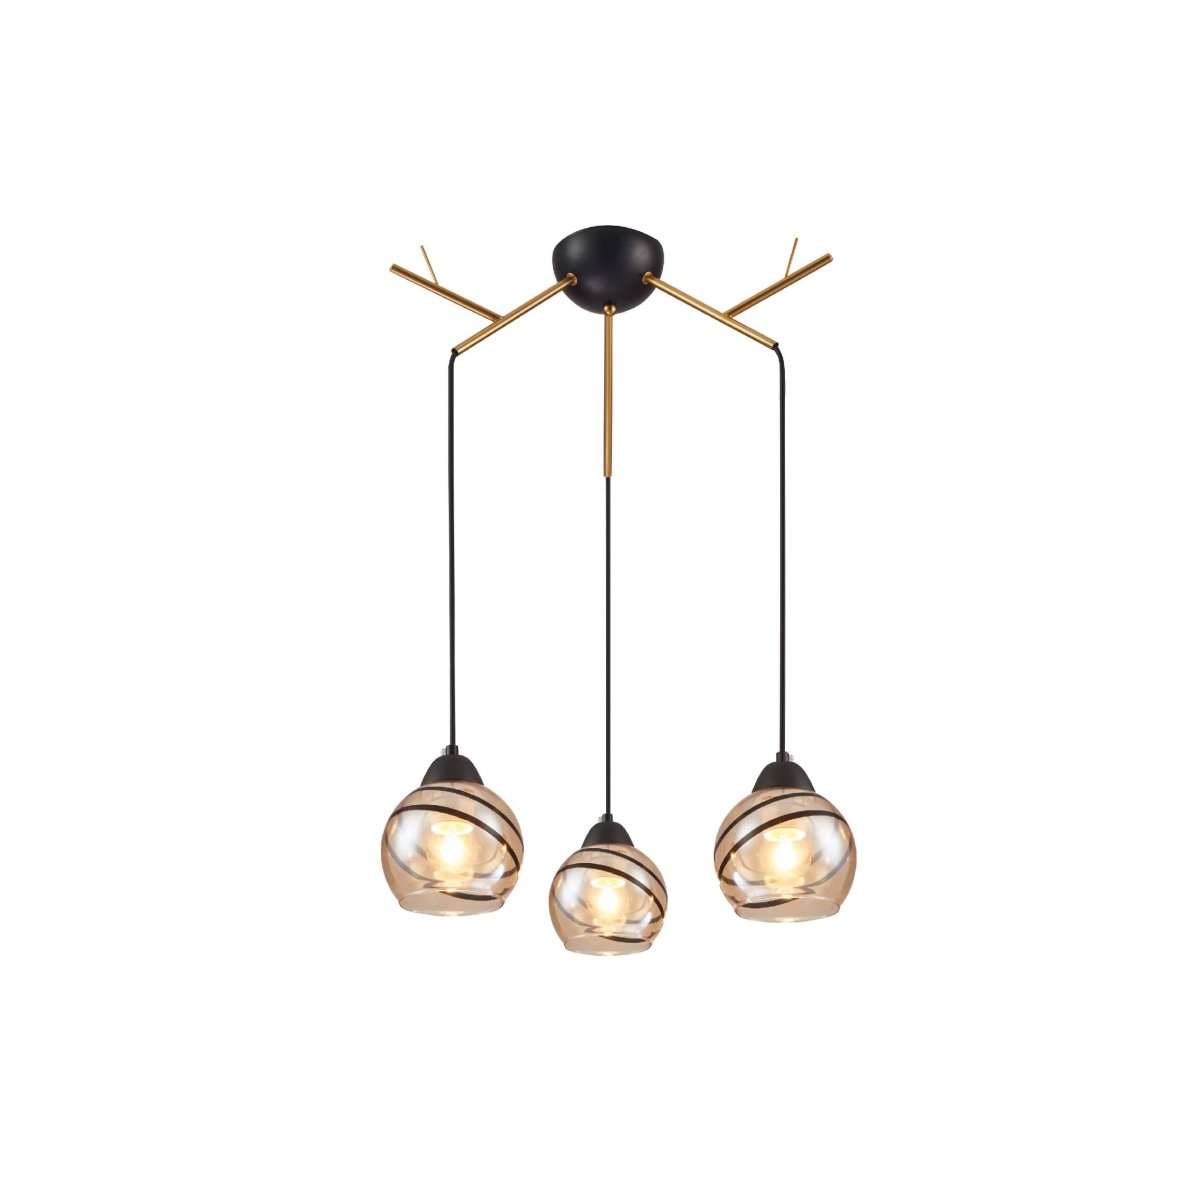 Main image of Amber Dome Glass Gold Twig Modern Ceiling Light | TEKLED 159-17594